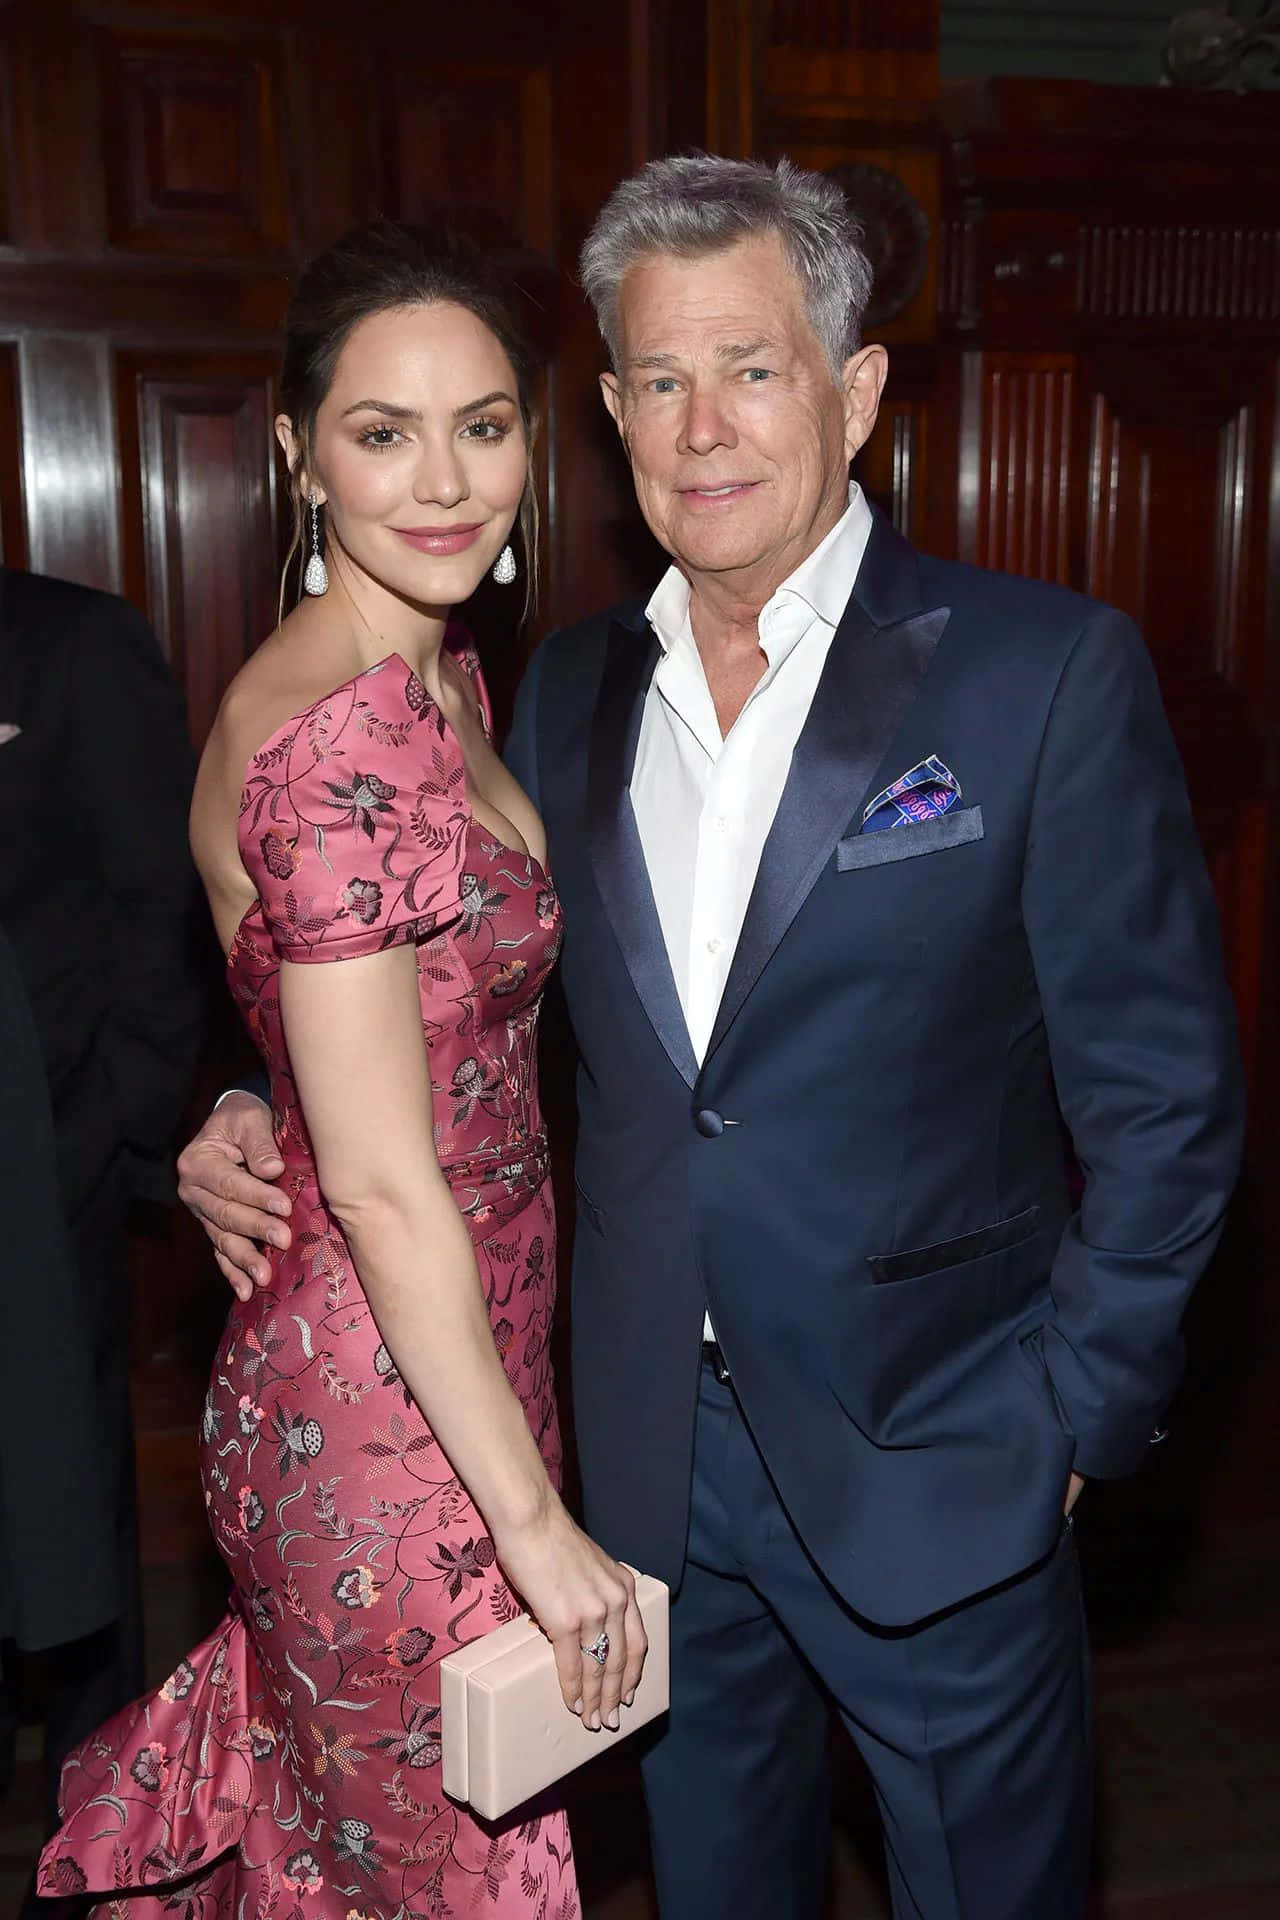 Katharine Mc Pheeand David Foster Event Appearance Background